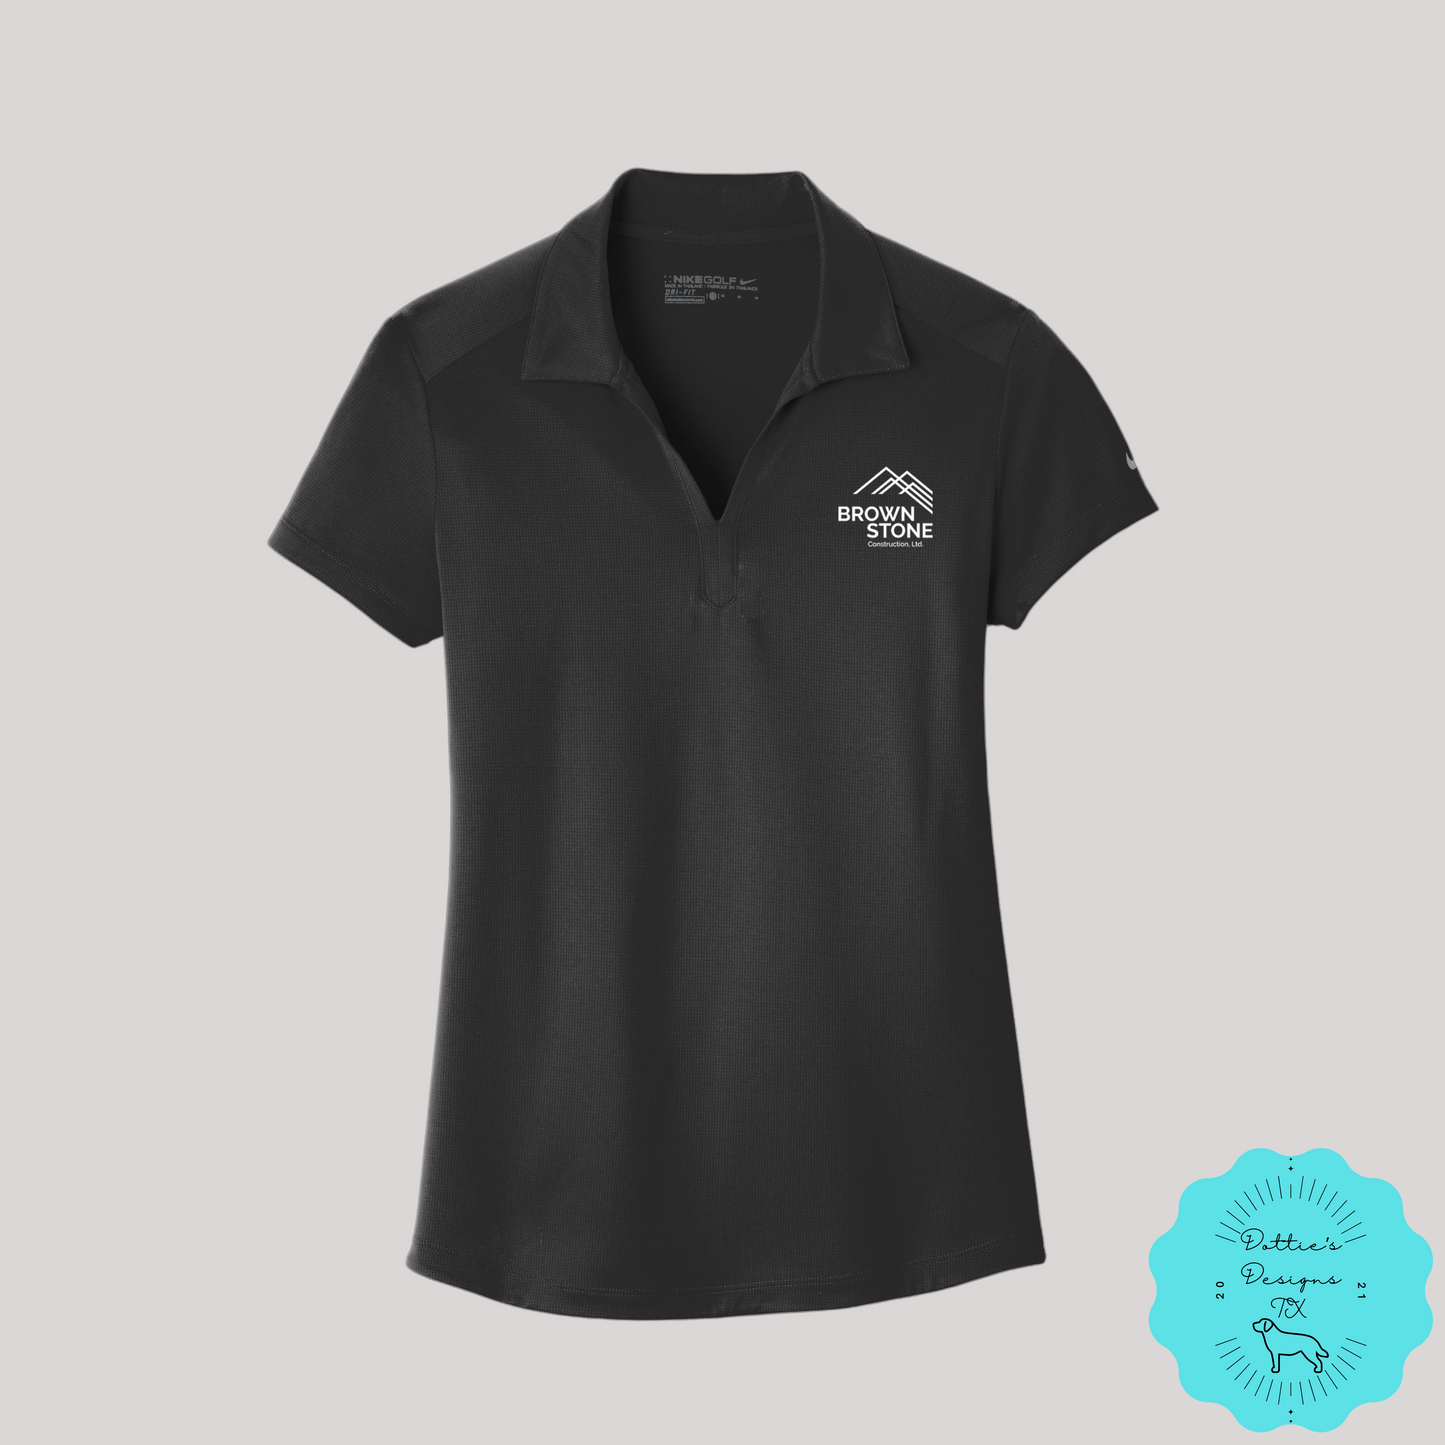 Ladies Brownstone Construction, LTD. Embroidered Nike Ladies Dri-FIT Legacy Polo